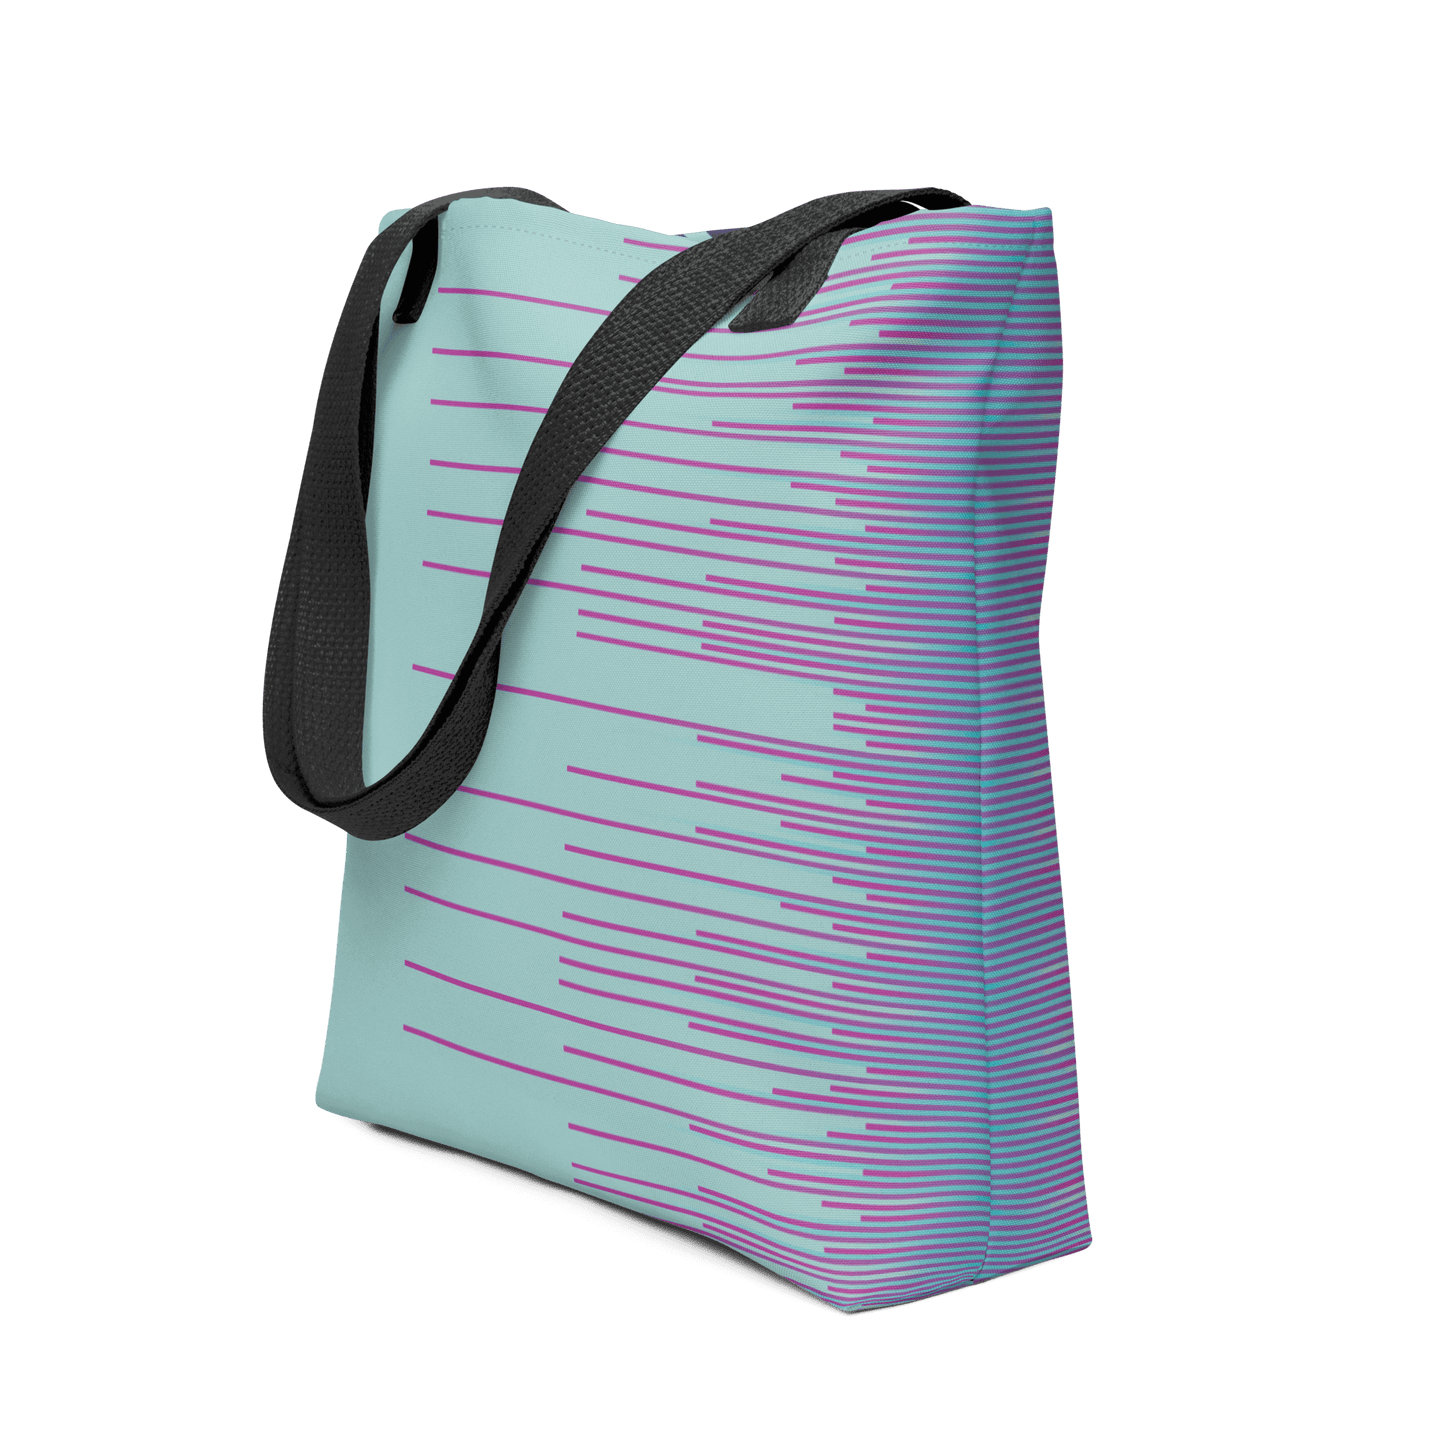 Mint Tote, chic design by CRiZ AMOR